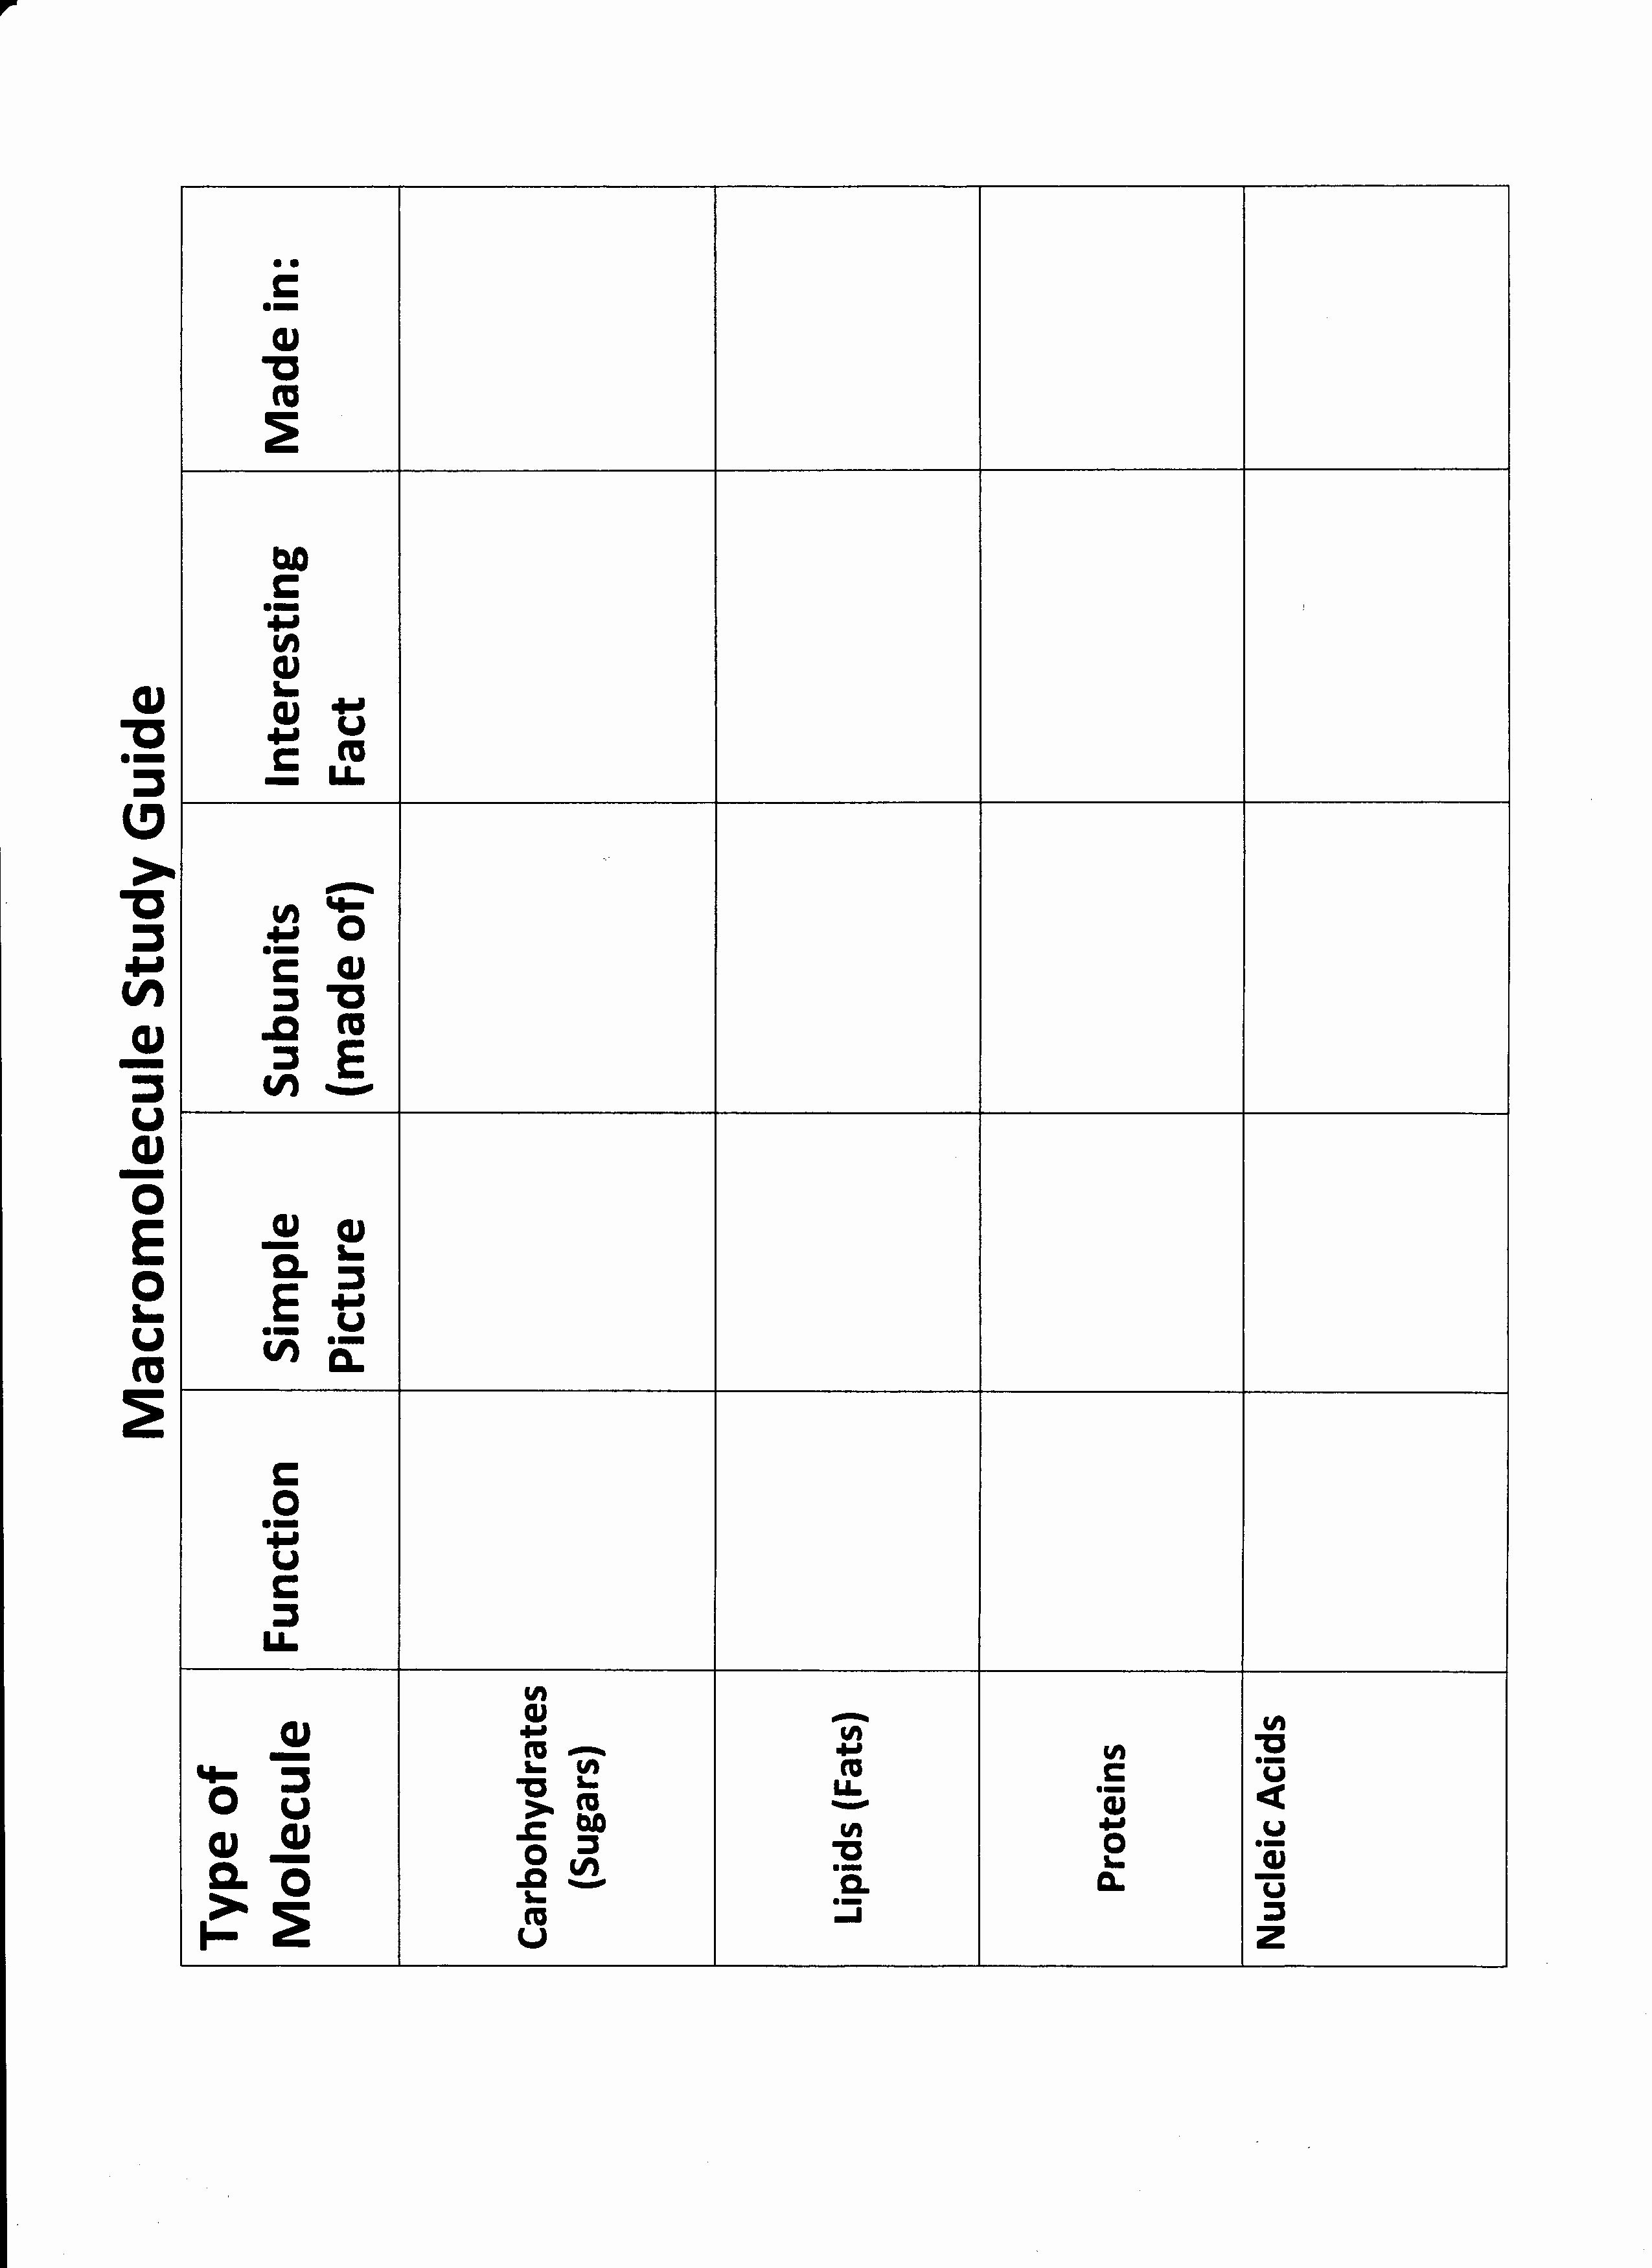 Building Macromolecules Worksheet Answers Awesome 10 Best Of Carbohydrate Worksheet Activity